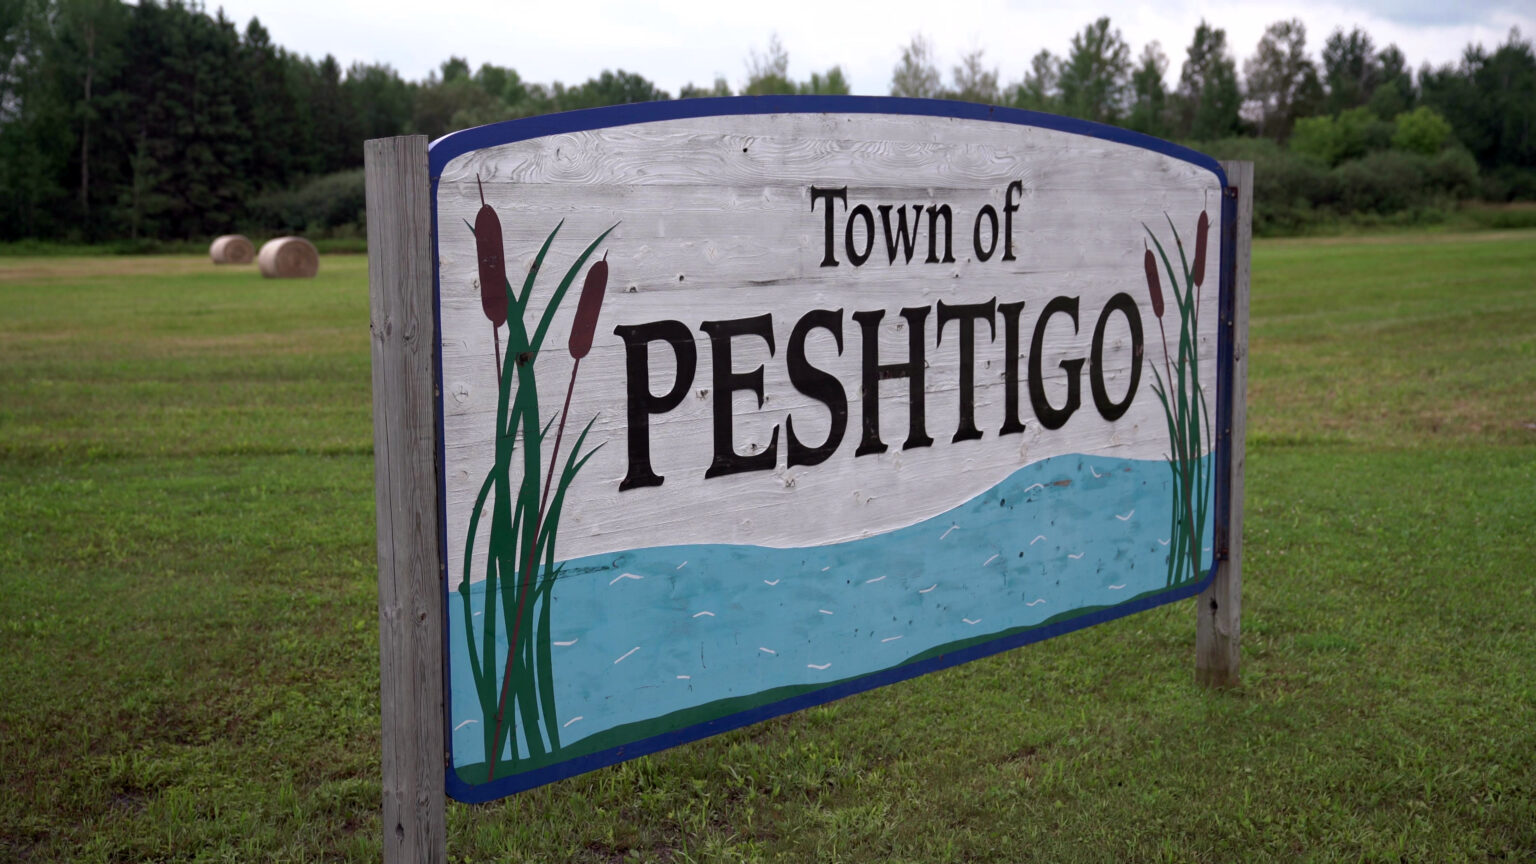 A wood sign with a painting of water and cattail wetland plants with the words Town of Peshtigo stands in a field, with round hay bails and trees in the background.